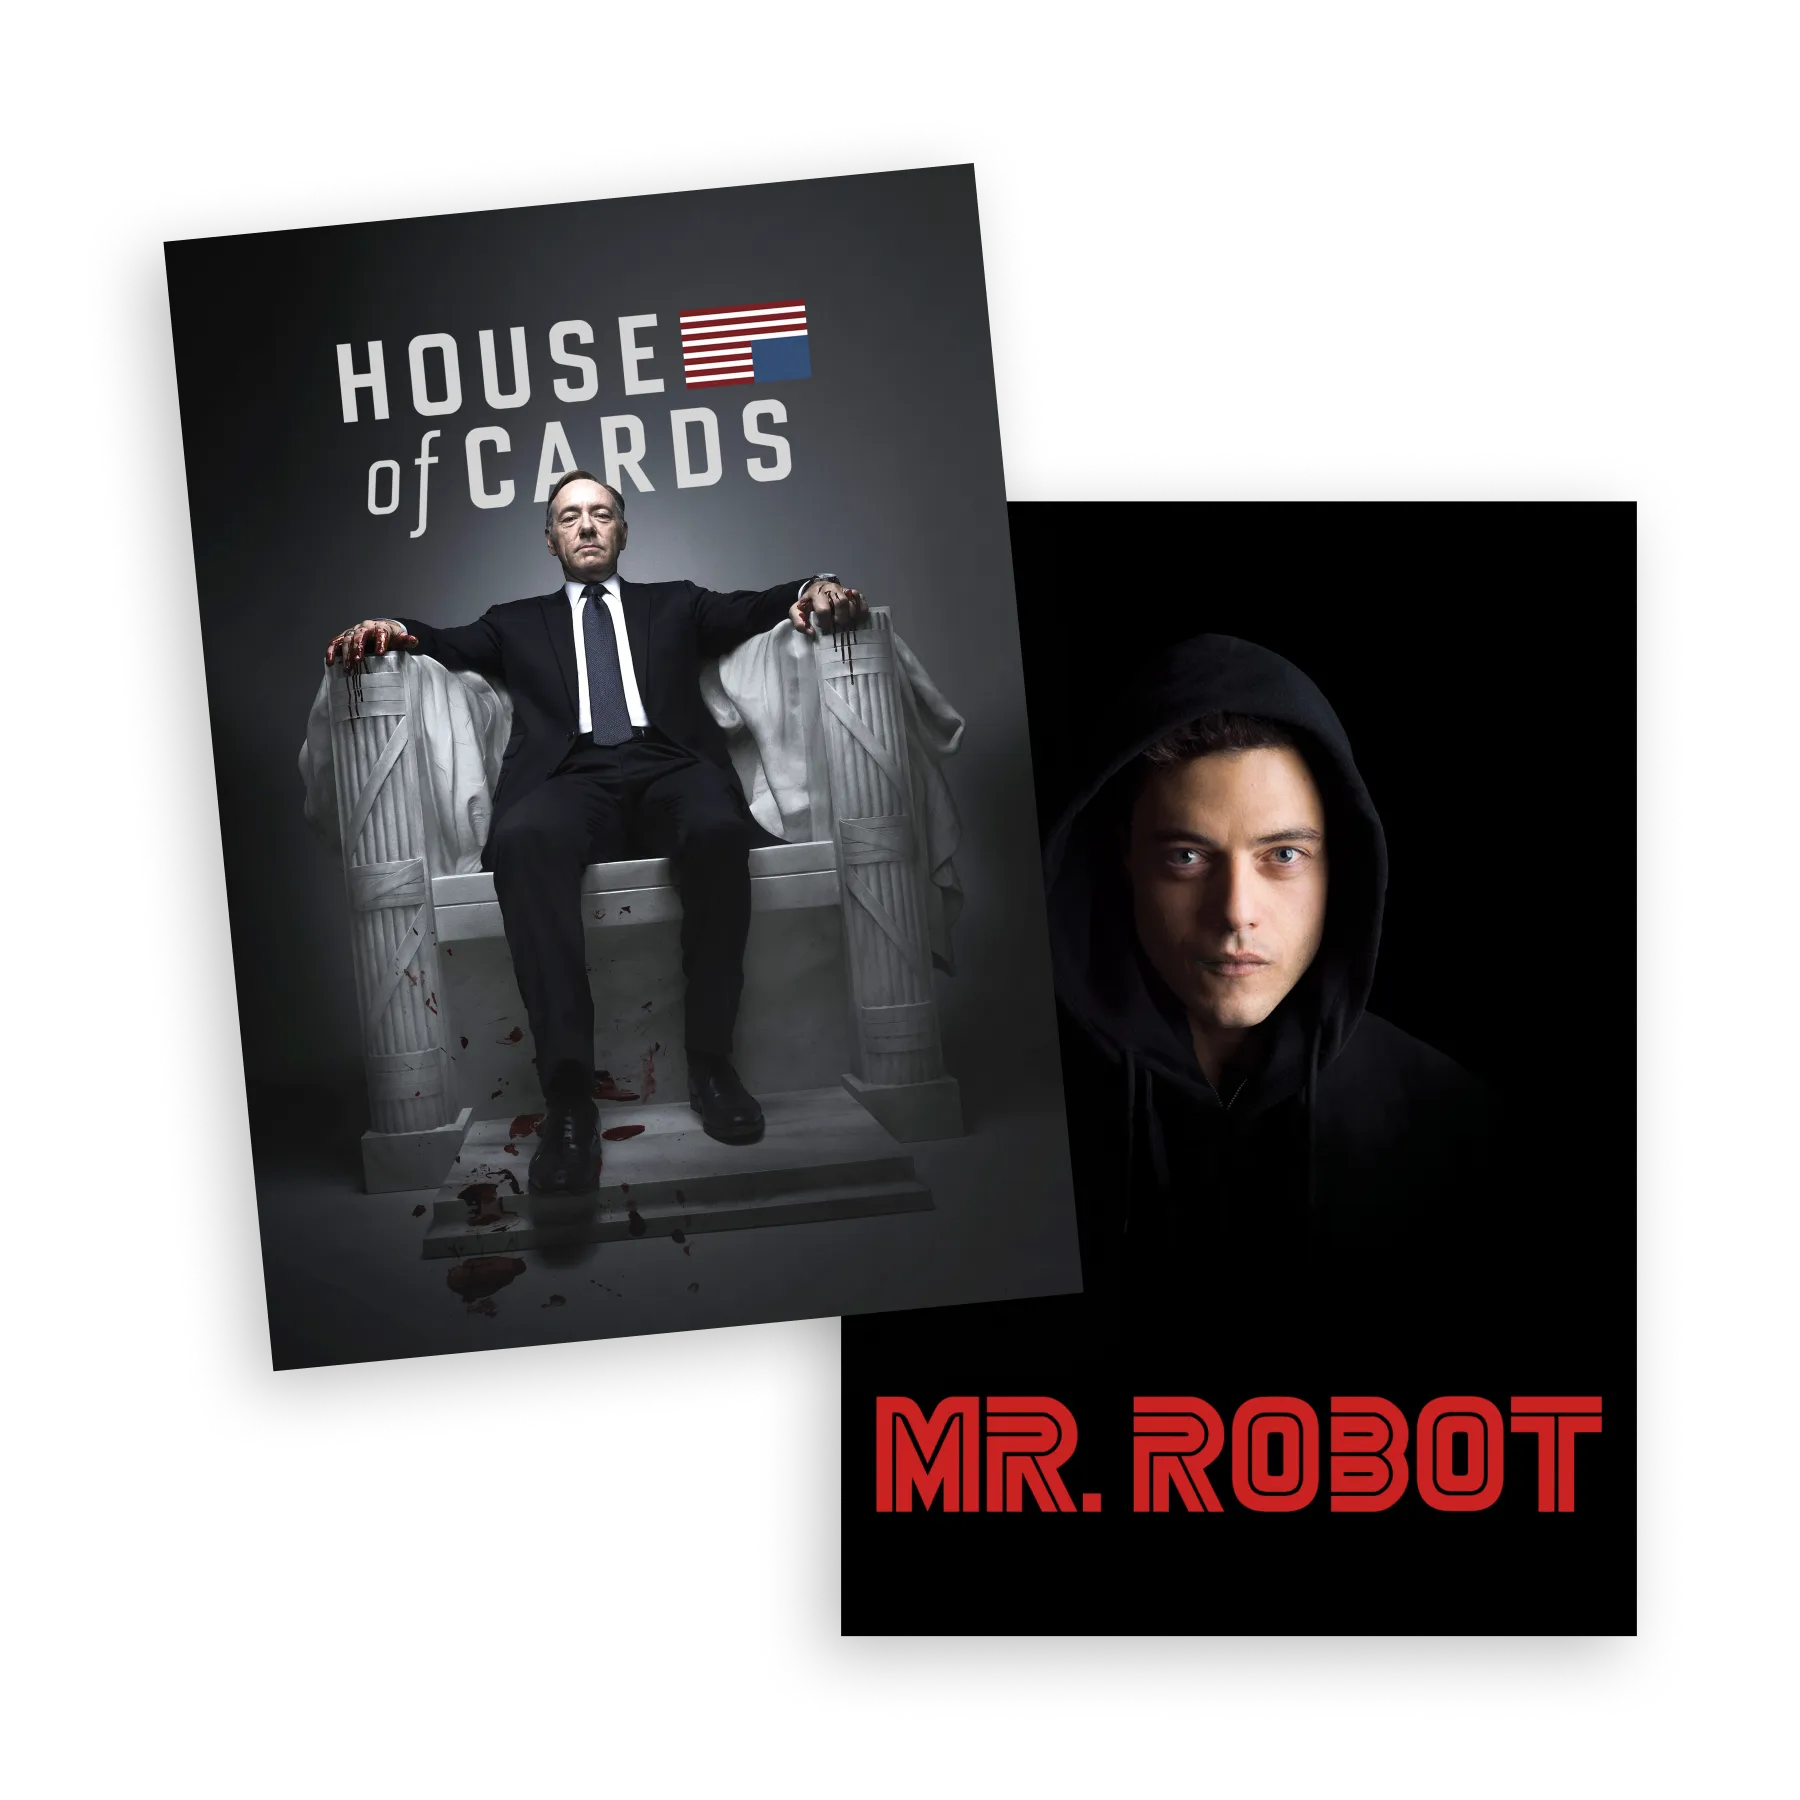 The artworks of the tv series House of Cards and Mr. Robot.